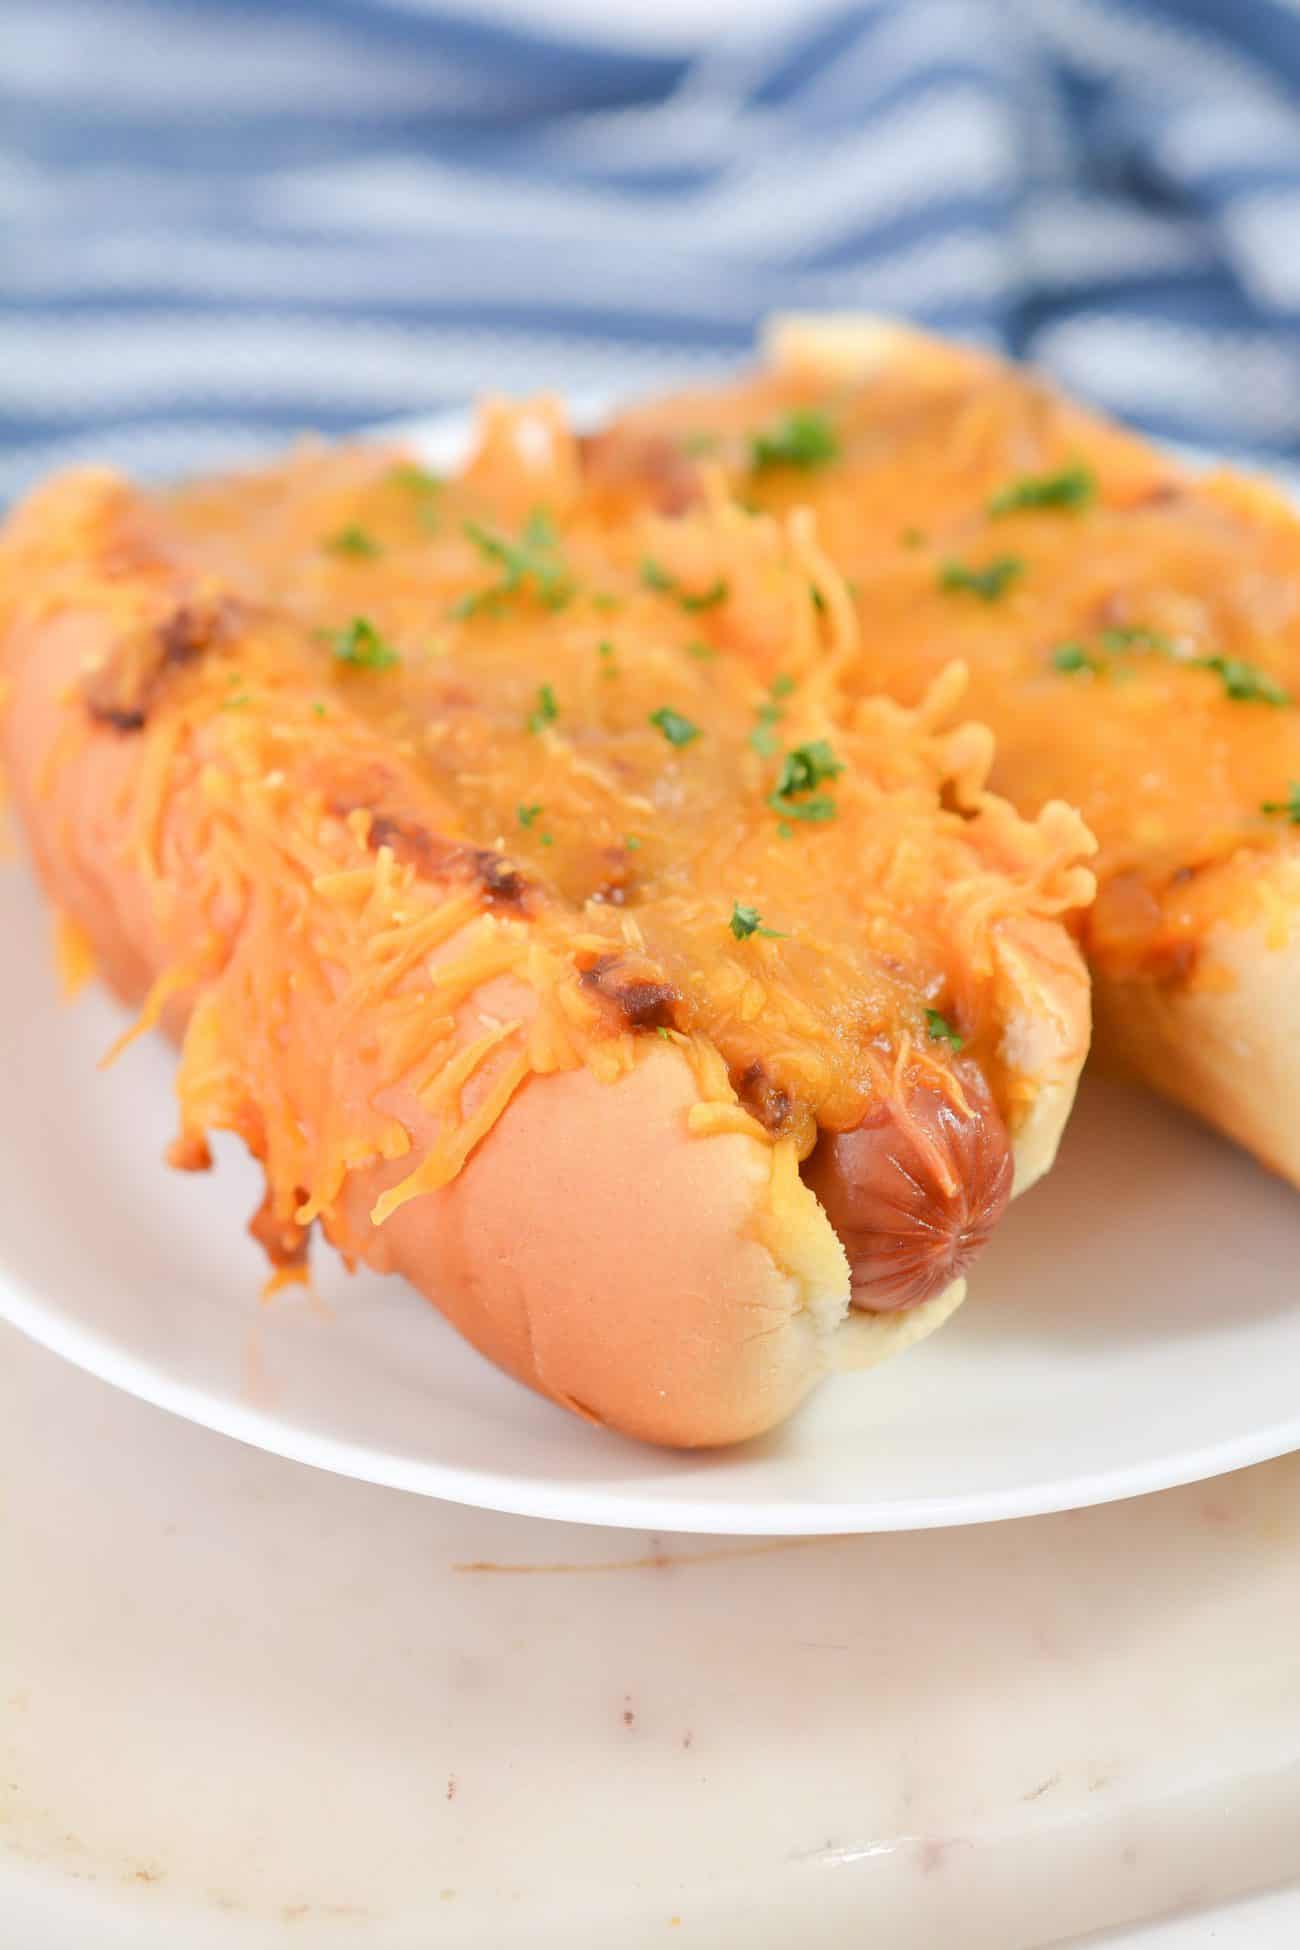 Oven Baked Chili Dogs